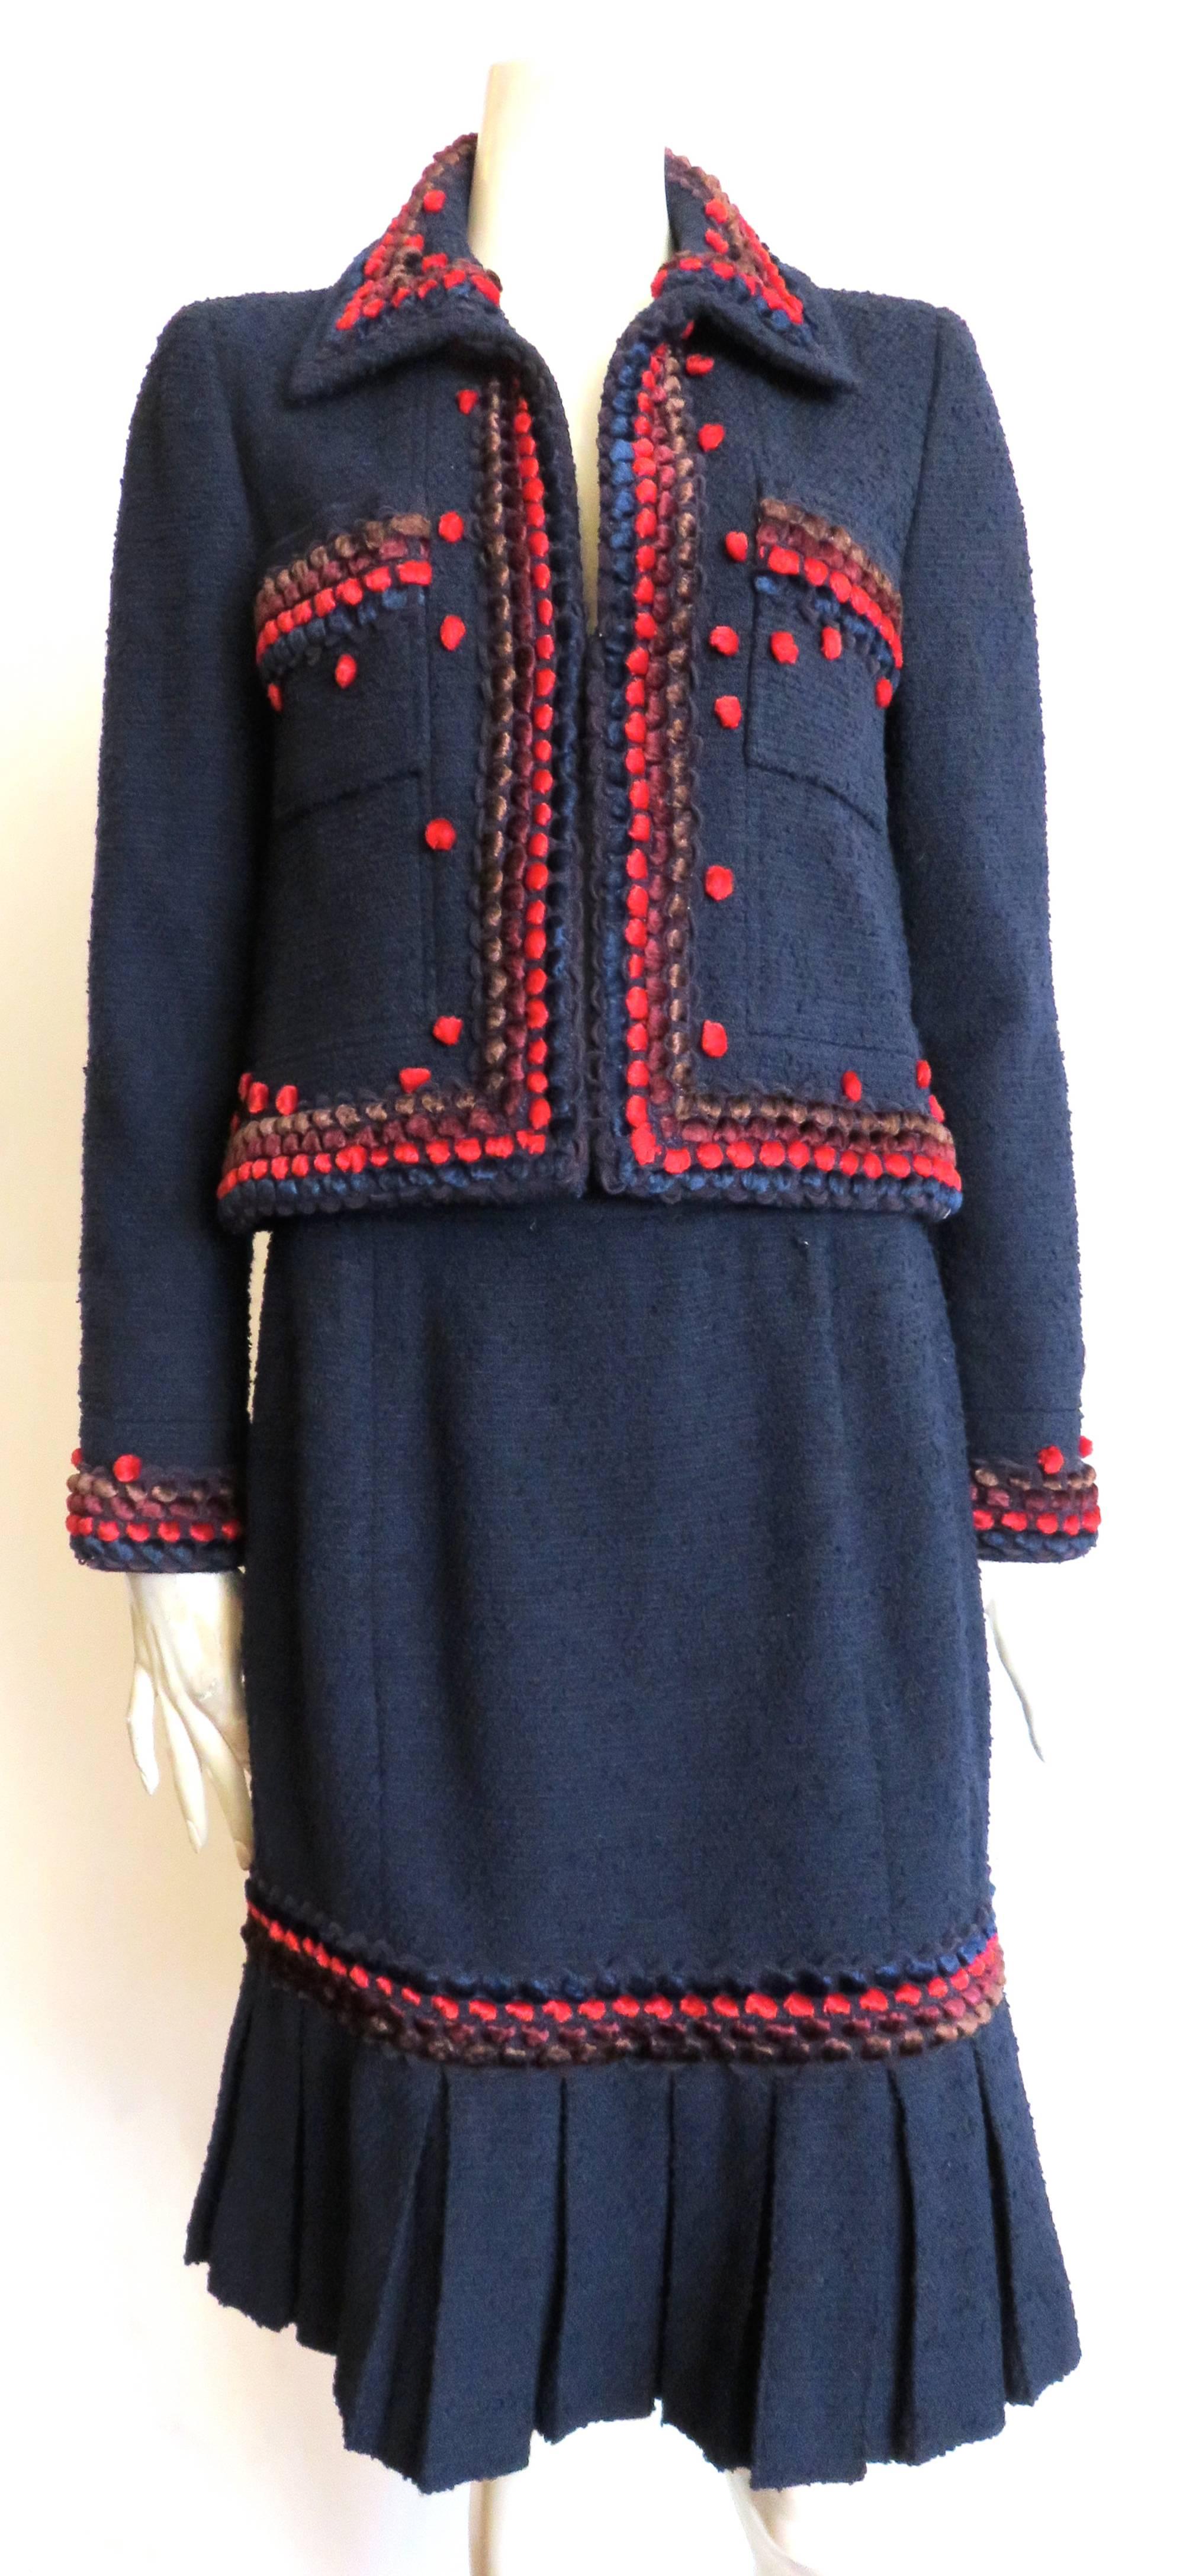 Great condition, CHANEL PARIS, Chenille pom-detail, wool bouclé, 3pc. skirt, or pant suit set.

This amazing set includes one jacket, one matching skirt, and one matching pant.

Dark, night-blue, wool bouclé base cloth fabrication with velvety